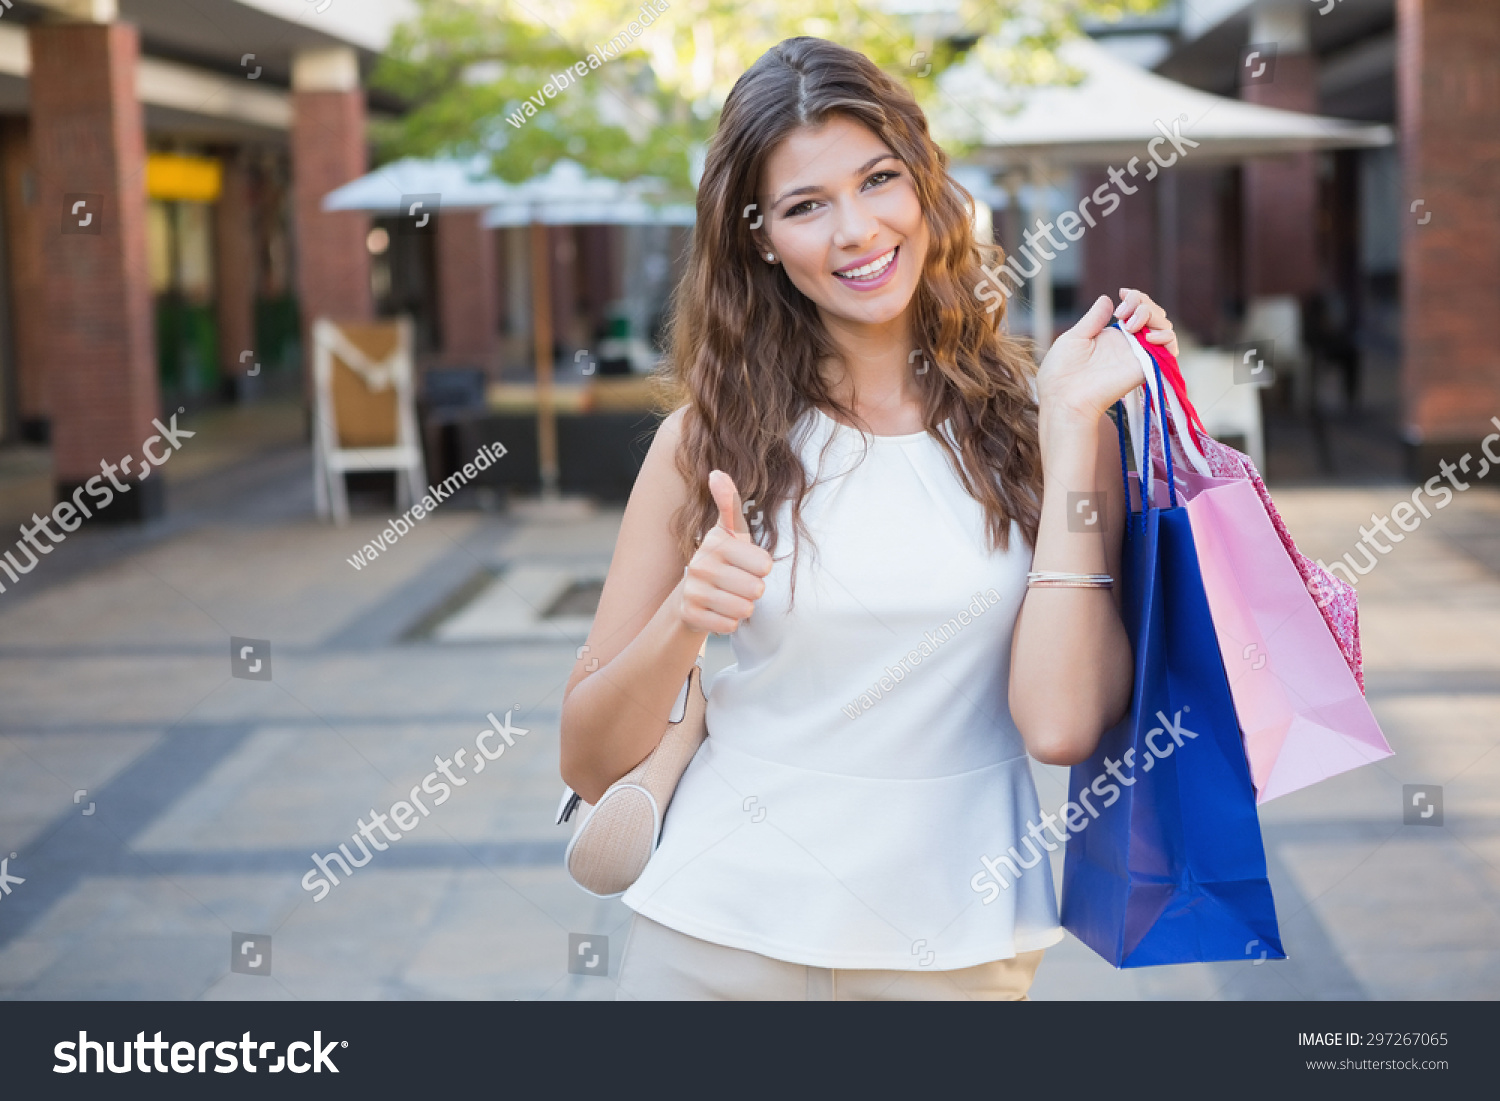 Portrait of smiling woman with shopping bags looking at camera and showing thumbs up at the shopping mall #297267065